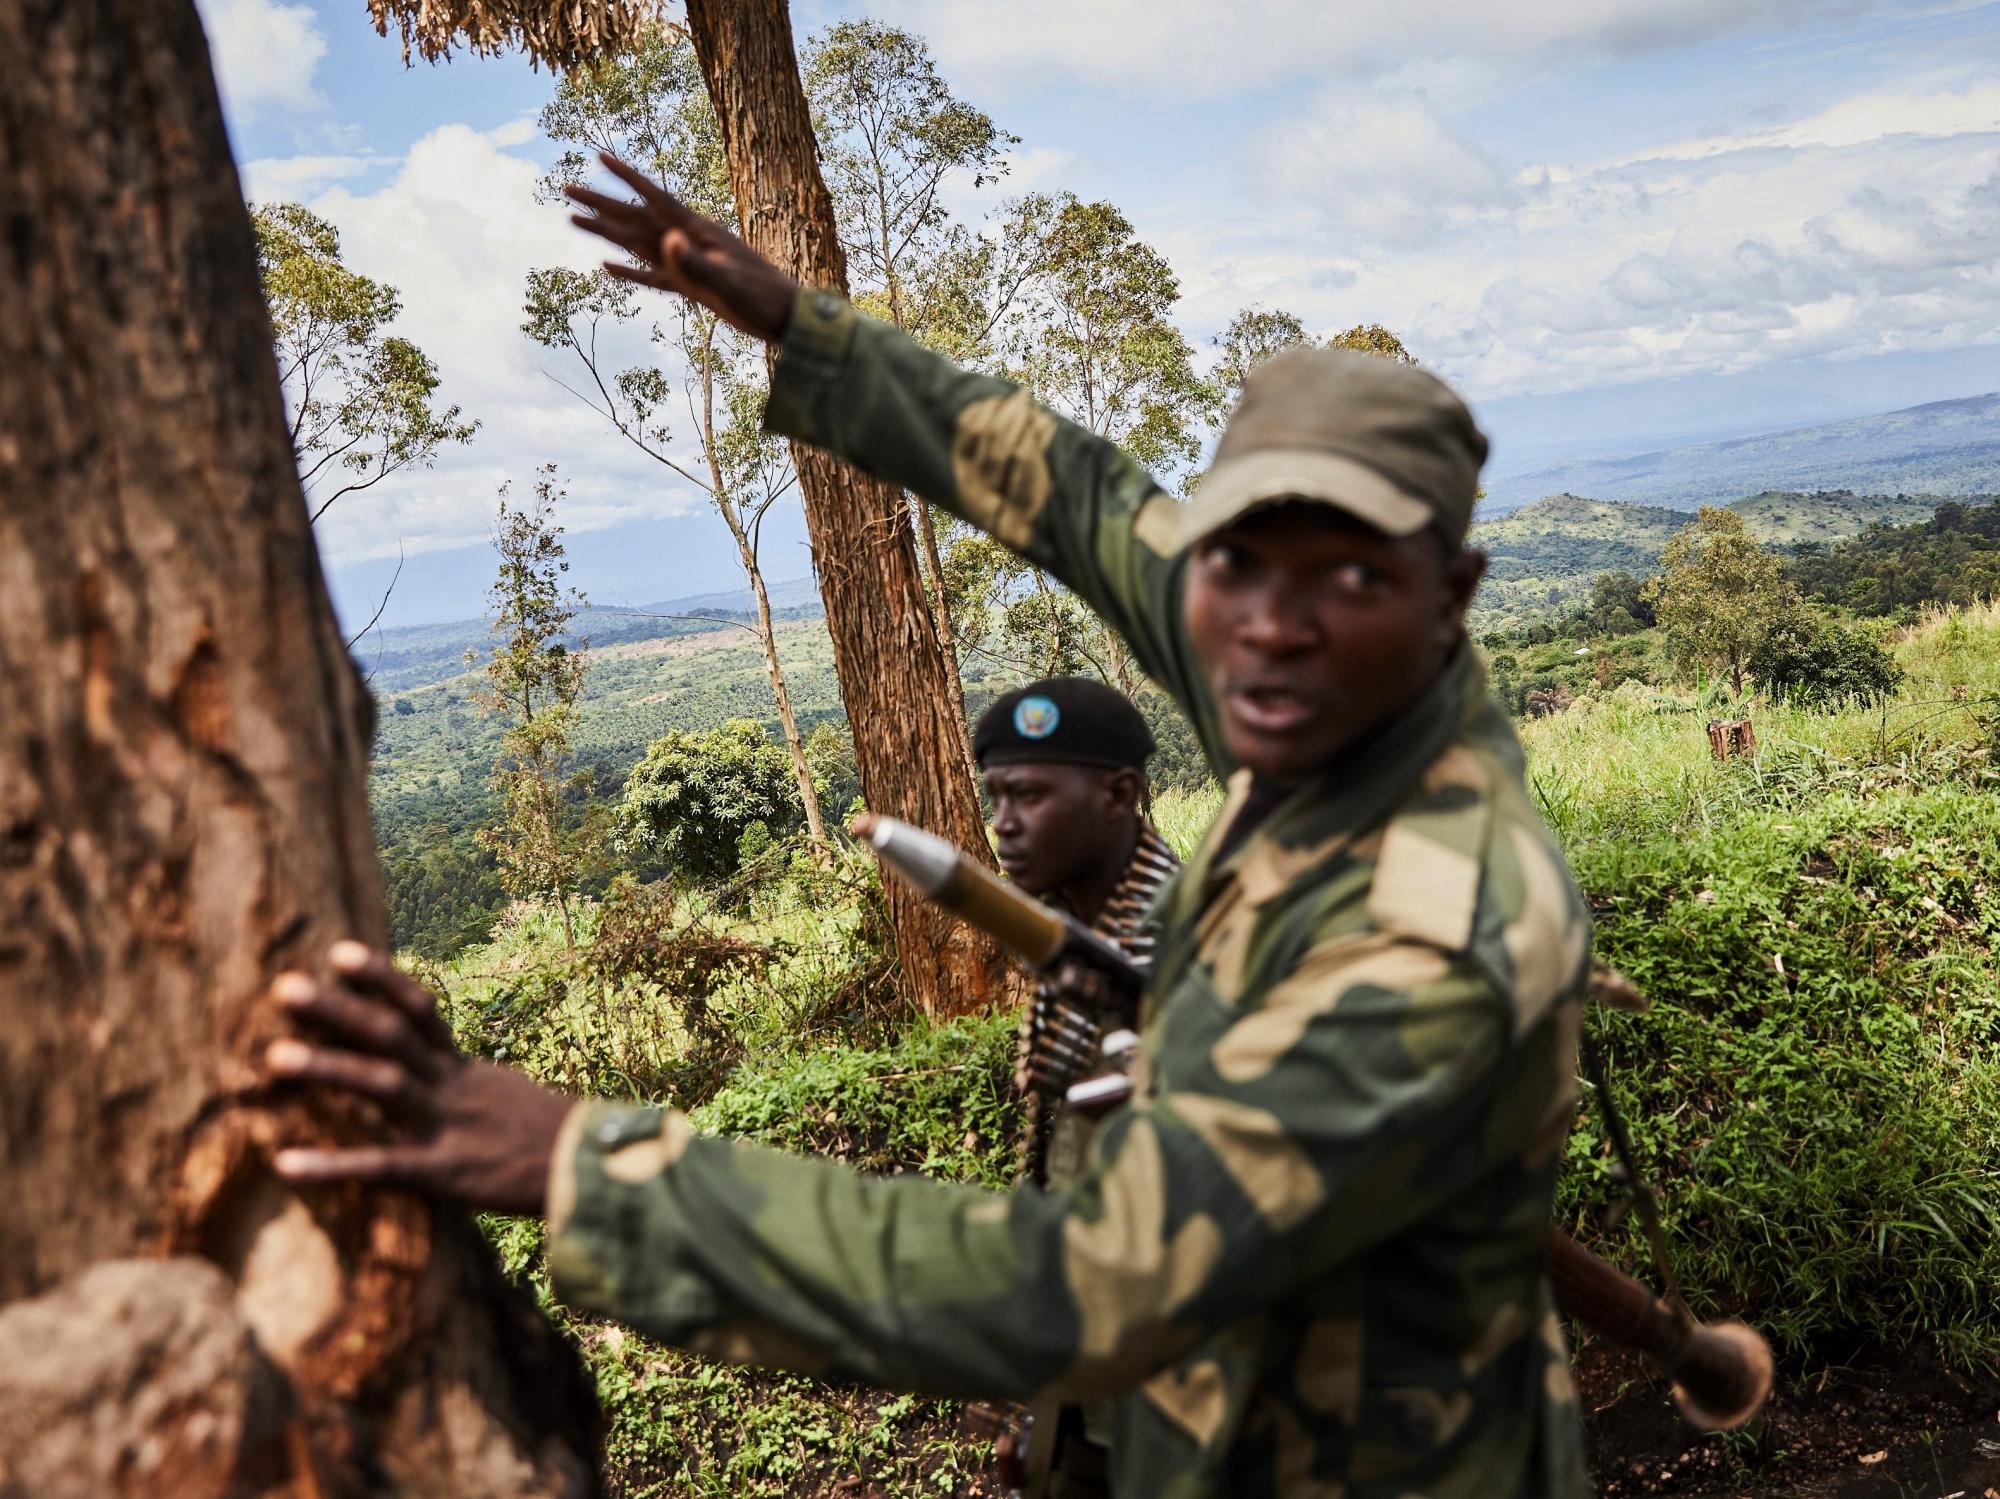 epa07567830 A soldier of the Congolese national army, the Armed Forces of the Democratic Republic of the Congo (FARDC), gestures as he takes up a position that overlooks the so-called 'triangle of death', where the ADF militia group operate, in Beni, North Kivu province, Democratic Republic of the Congo, 11 May 2019 (issued 13 May 2019). Dealing with the Ebola outbreak in Beni has multiple security challenges including attacks from local Mai Mai militia group and the Ugandan-originating Allied Democratic Forces (ADF) rebel group that claimed to be connected to the Islamic State (IS) networks.  EPA/HUGH KINSELLA CUNNINGHAM DR CONGO EBOLA ISLAMIC STATE